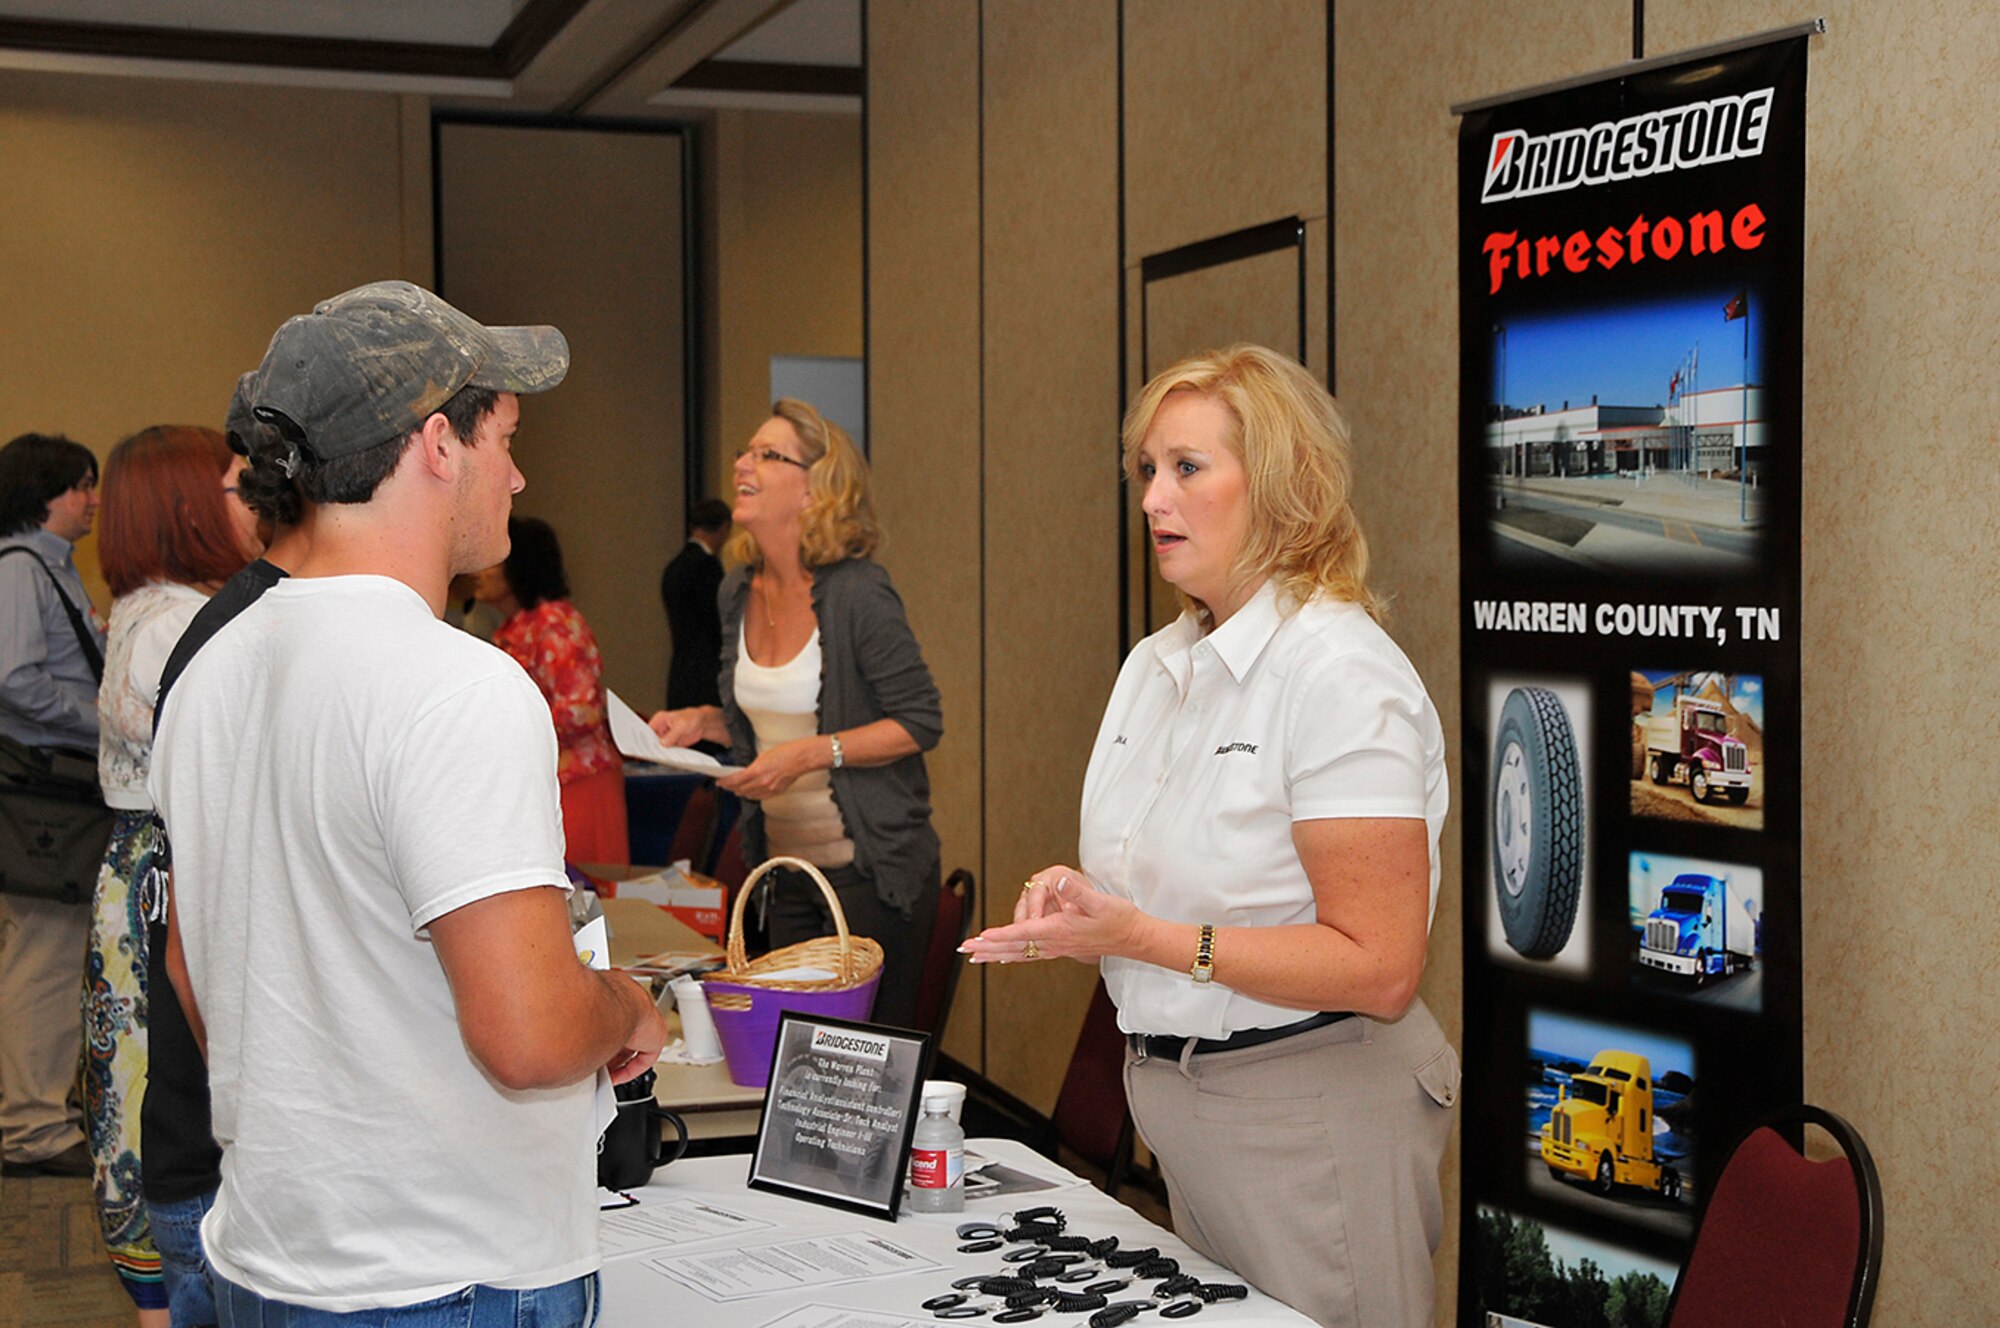 A representative from Bridgestone talks with a potential employee during the recent job fair sponsored by Arnold Community Council and Tennessee Senator Janice Bowling.

